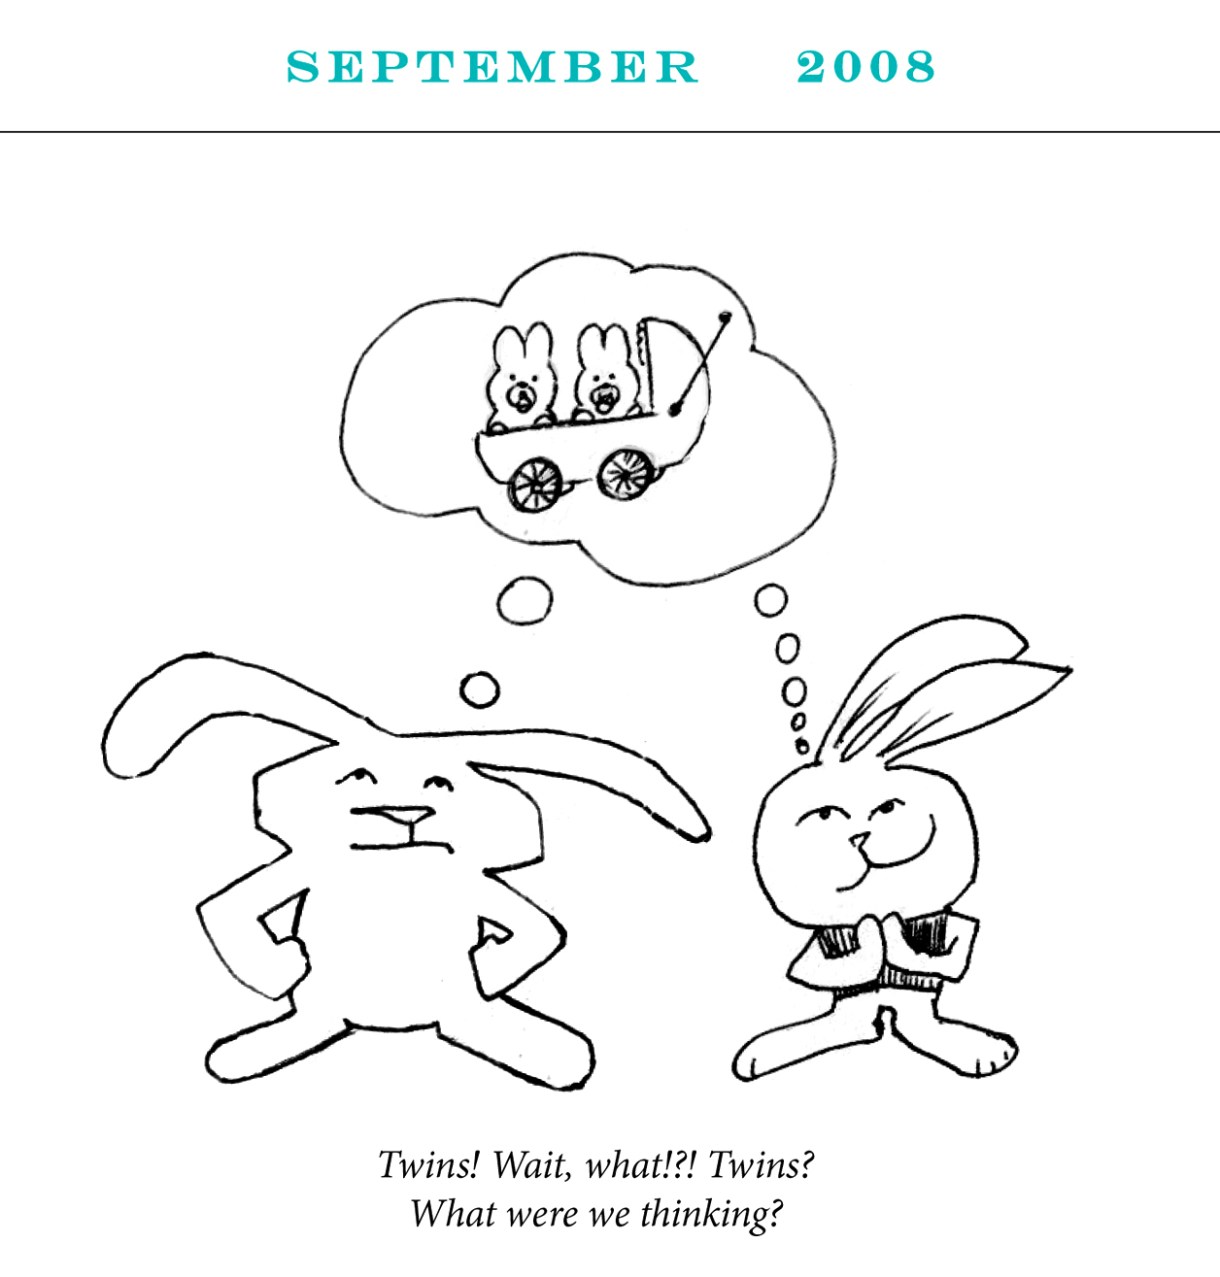 September 2008 Image description: Two rabbits share a thought bubble containing a pair of baby bunnies in a stroller. One of the adult rabbits is dreamy and happy. The other has her hands on her hips looking up with concern Caption: “Twins! Wait, what!?! Twins? What were we thinking?”